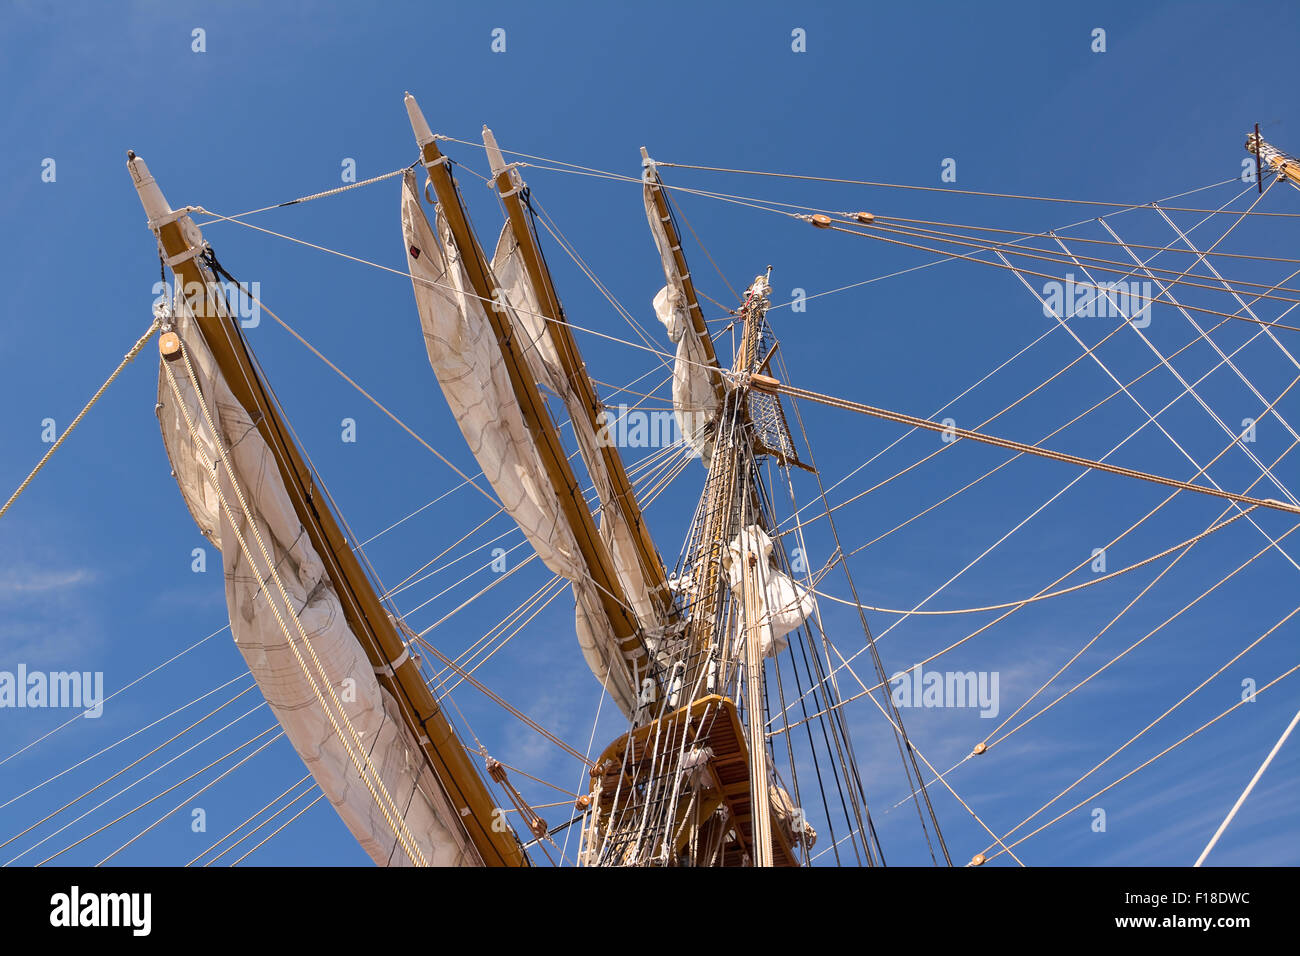 Mast of sail ship in blue sky Stock Photo